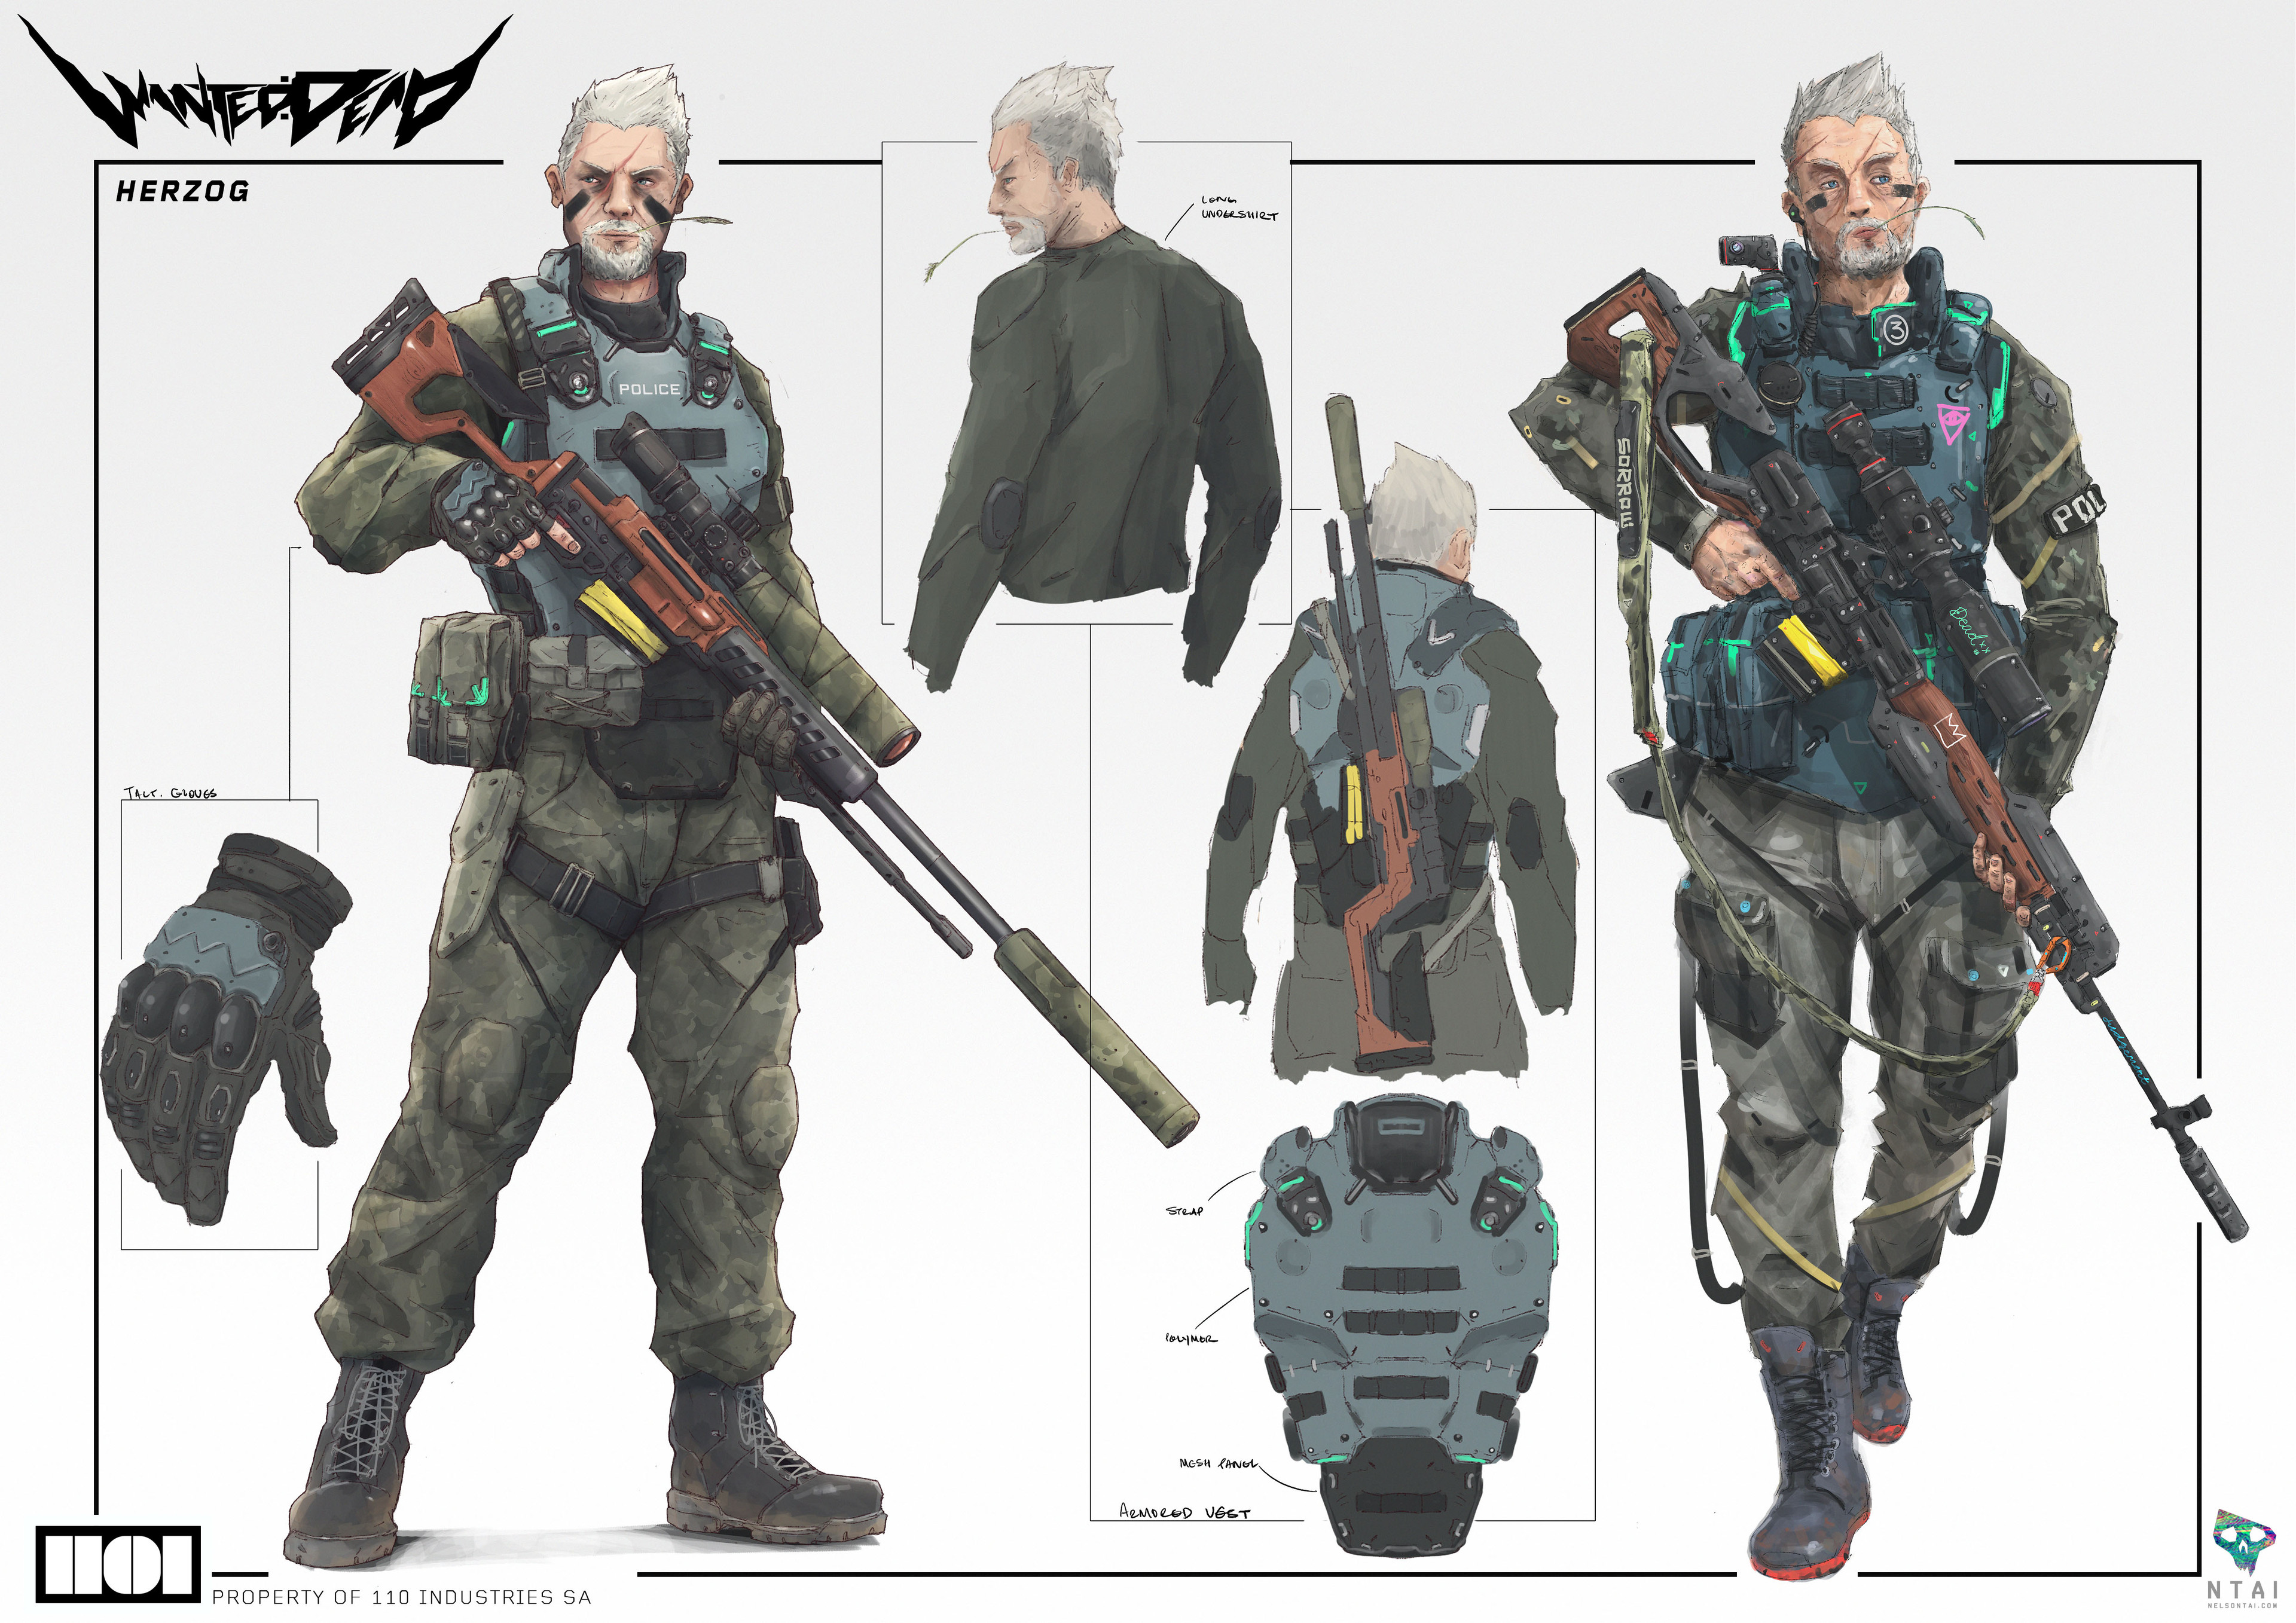 Herzog is the the rash and wild sniper of the team.